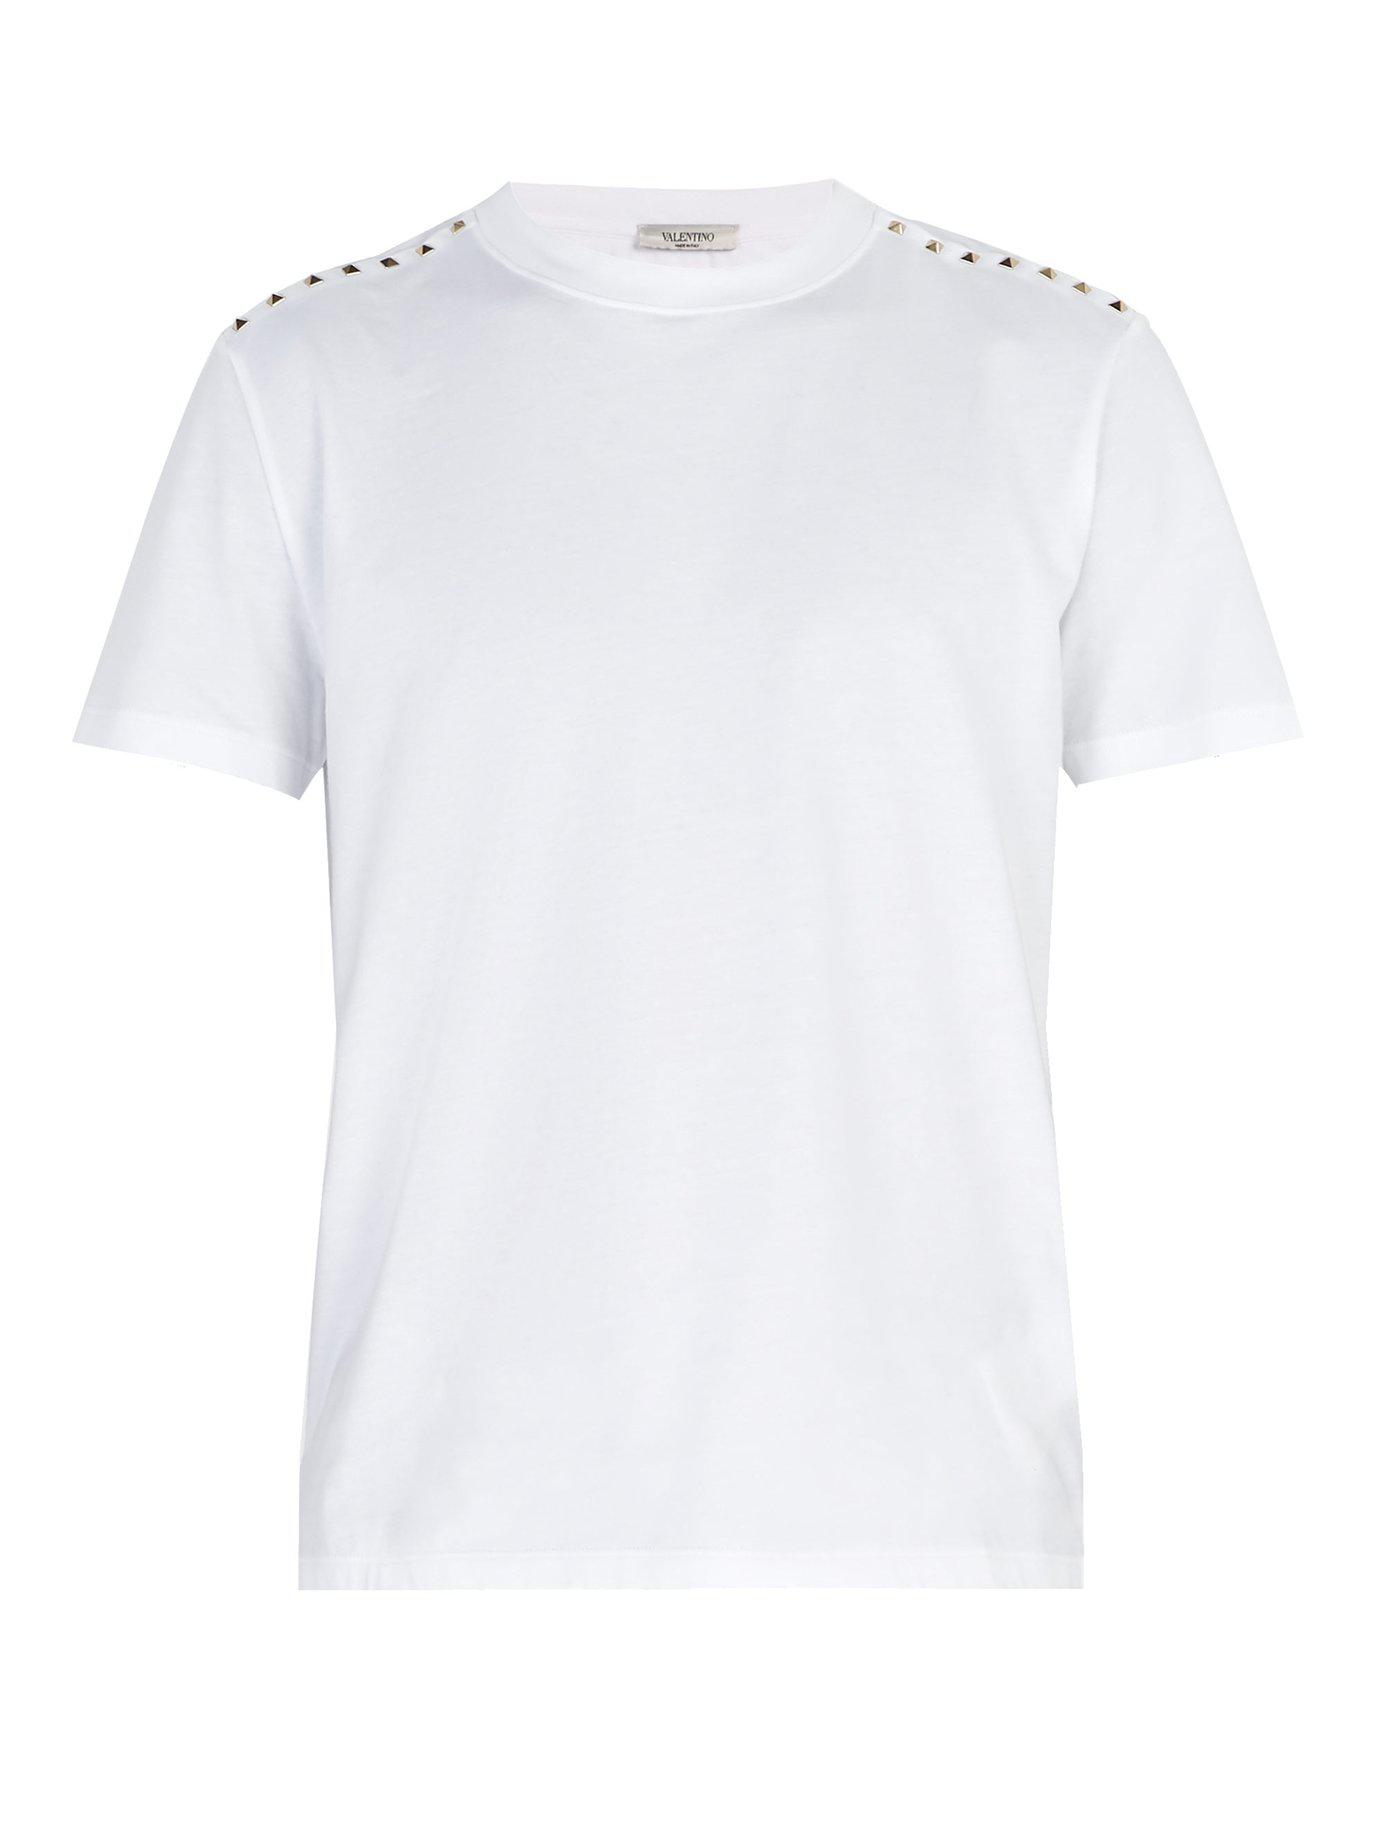 Valentino Rockstud Untitled #9 Cotton T Shirt in White for Men - Lyst